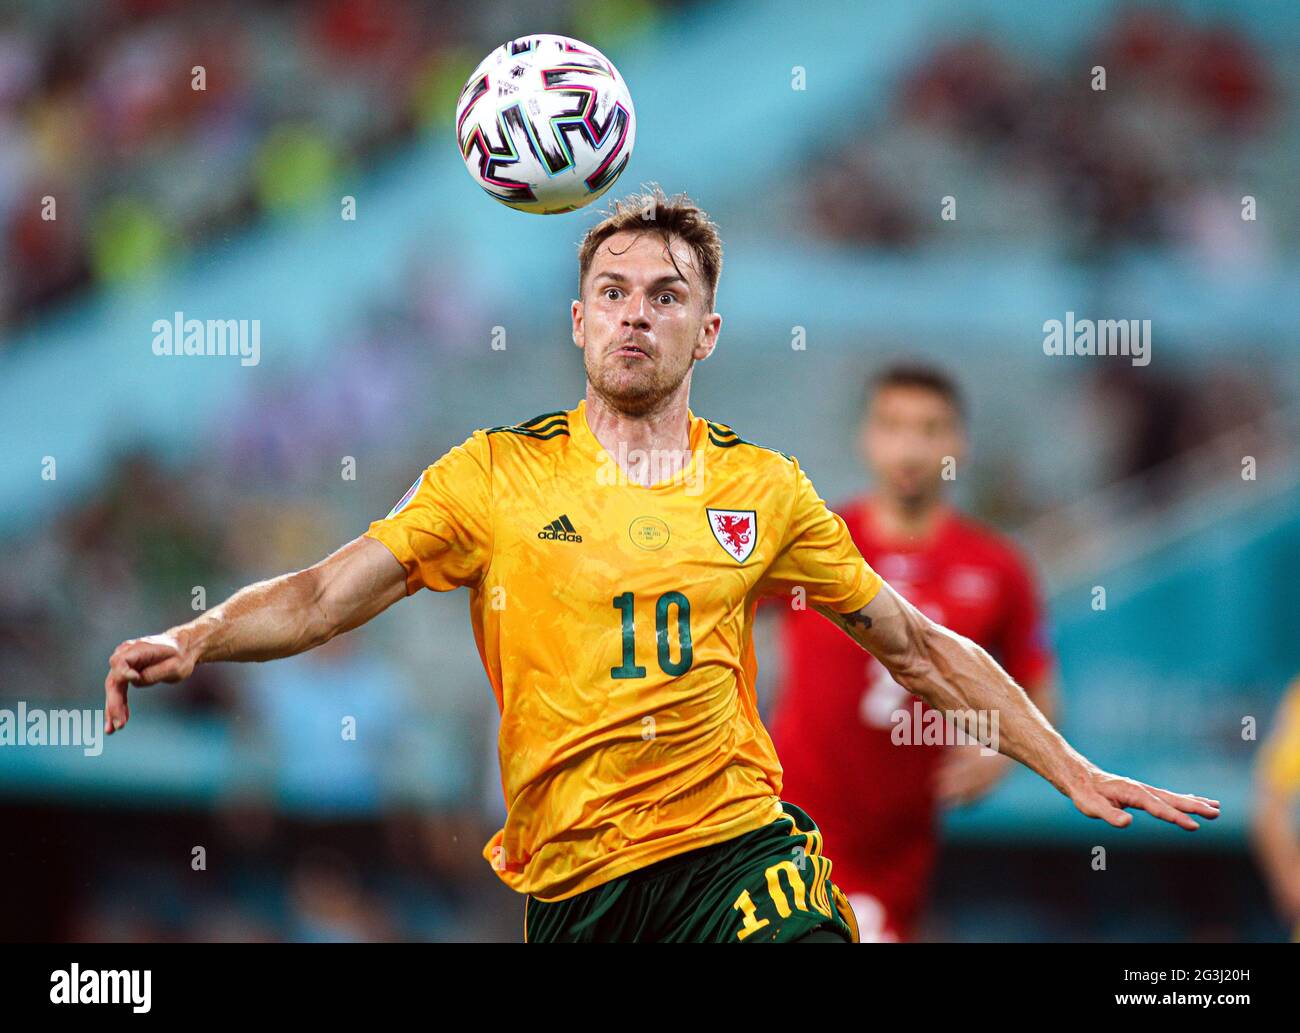 Wales' Aaron Ramsey during the UEFA Euro 2020 Group A match at the Baku Olympic Stadium in Azerbaijan. Picture date: Wednesday June 16, 2021. Stock Photo